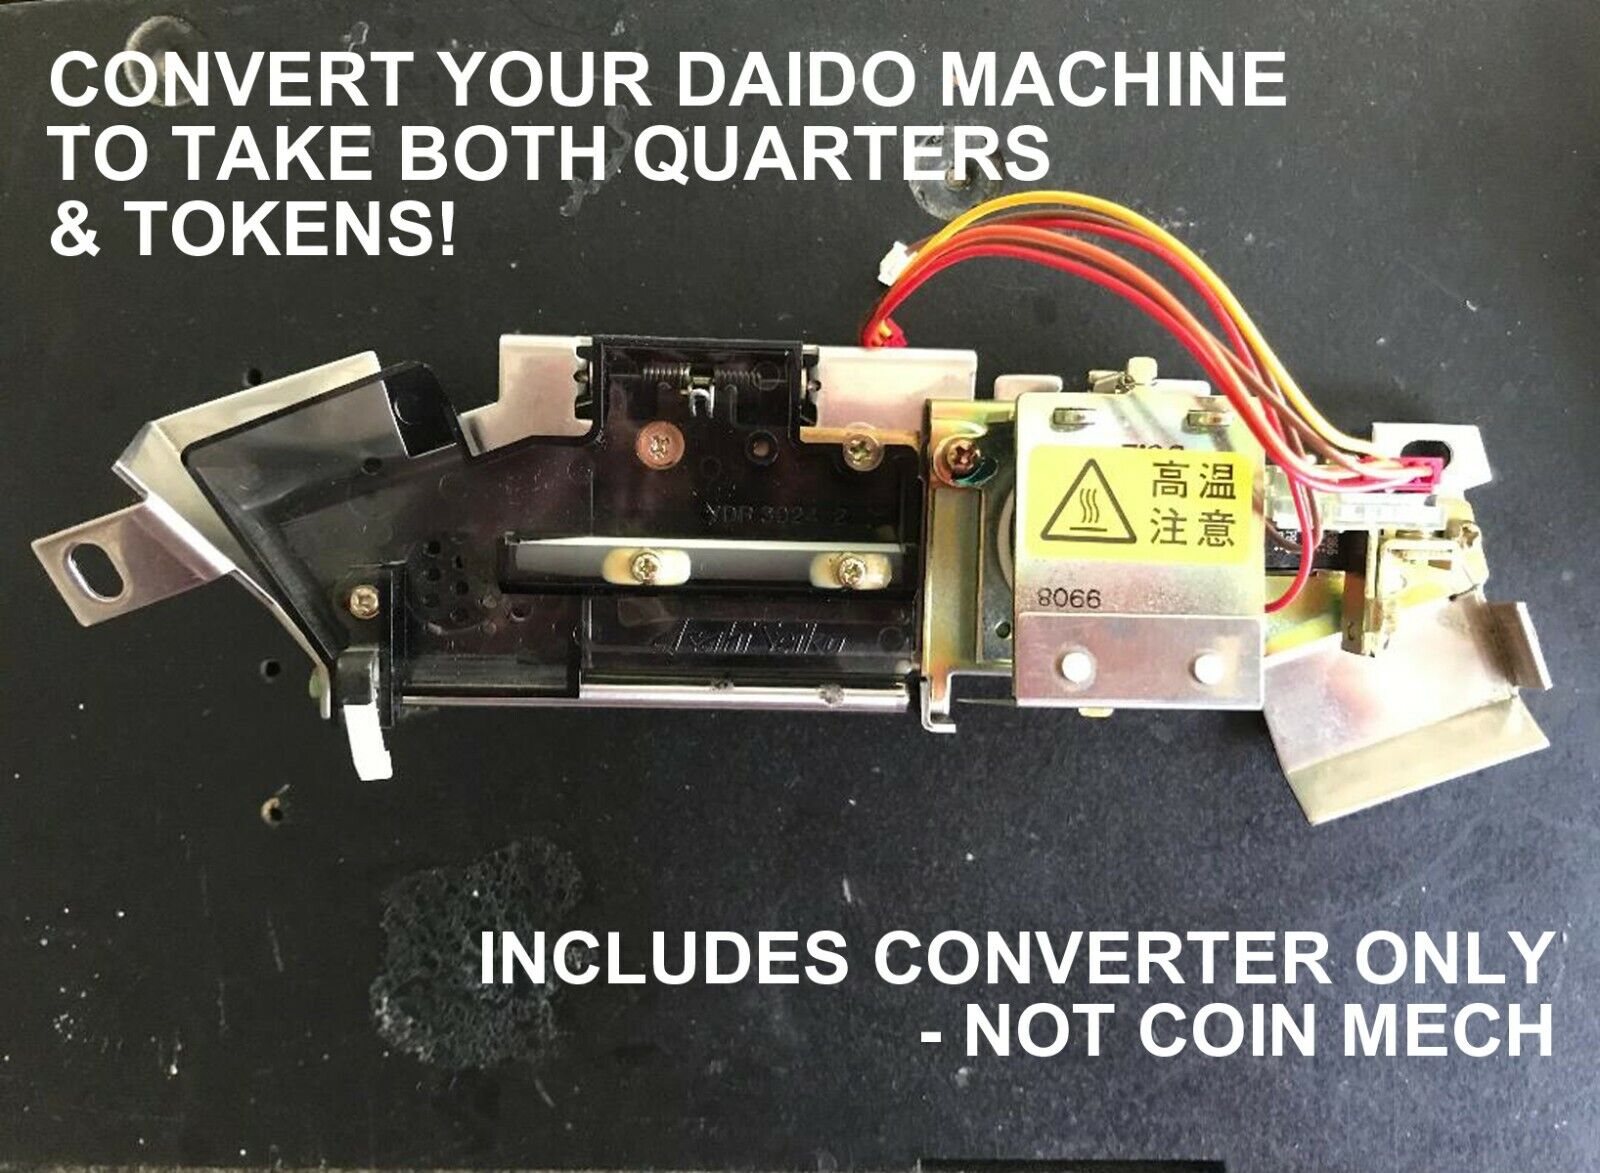 $.25 CONVERTER FOR DAIDO PACHISLO SLOT MACHINES, ACCEPTS BOTH QUARTERS & TOKENS